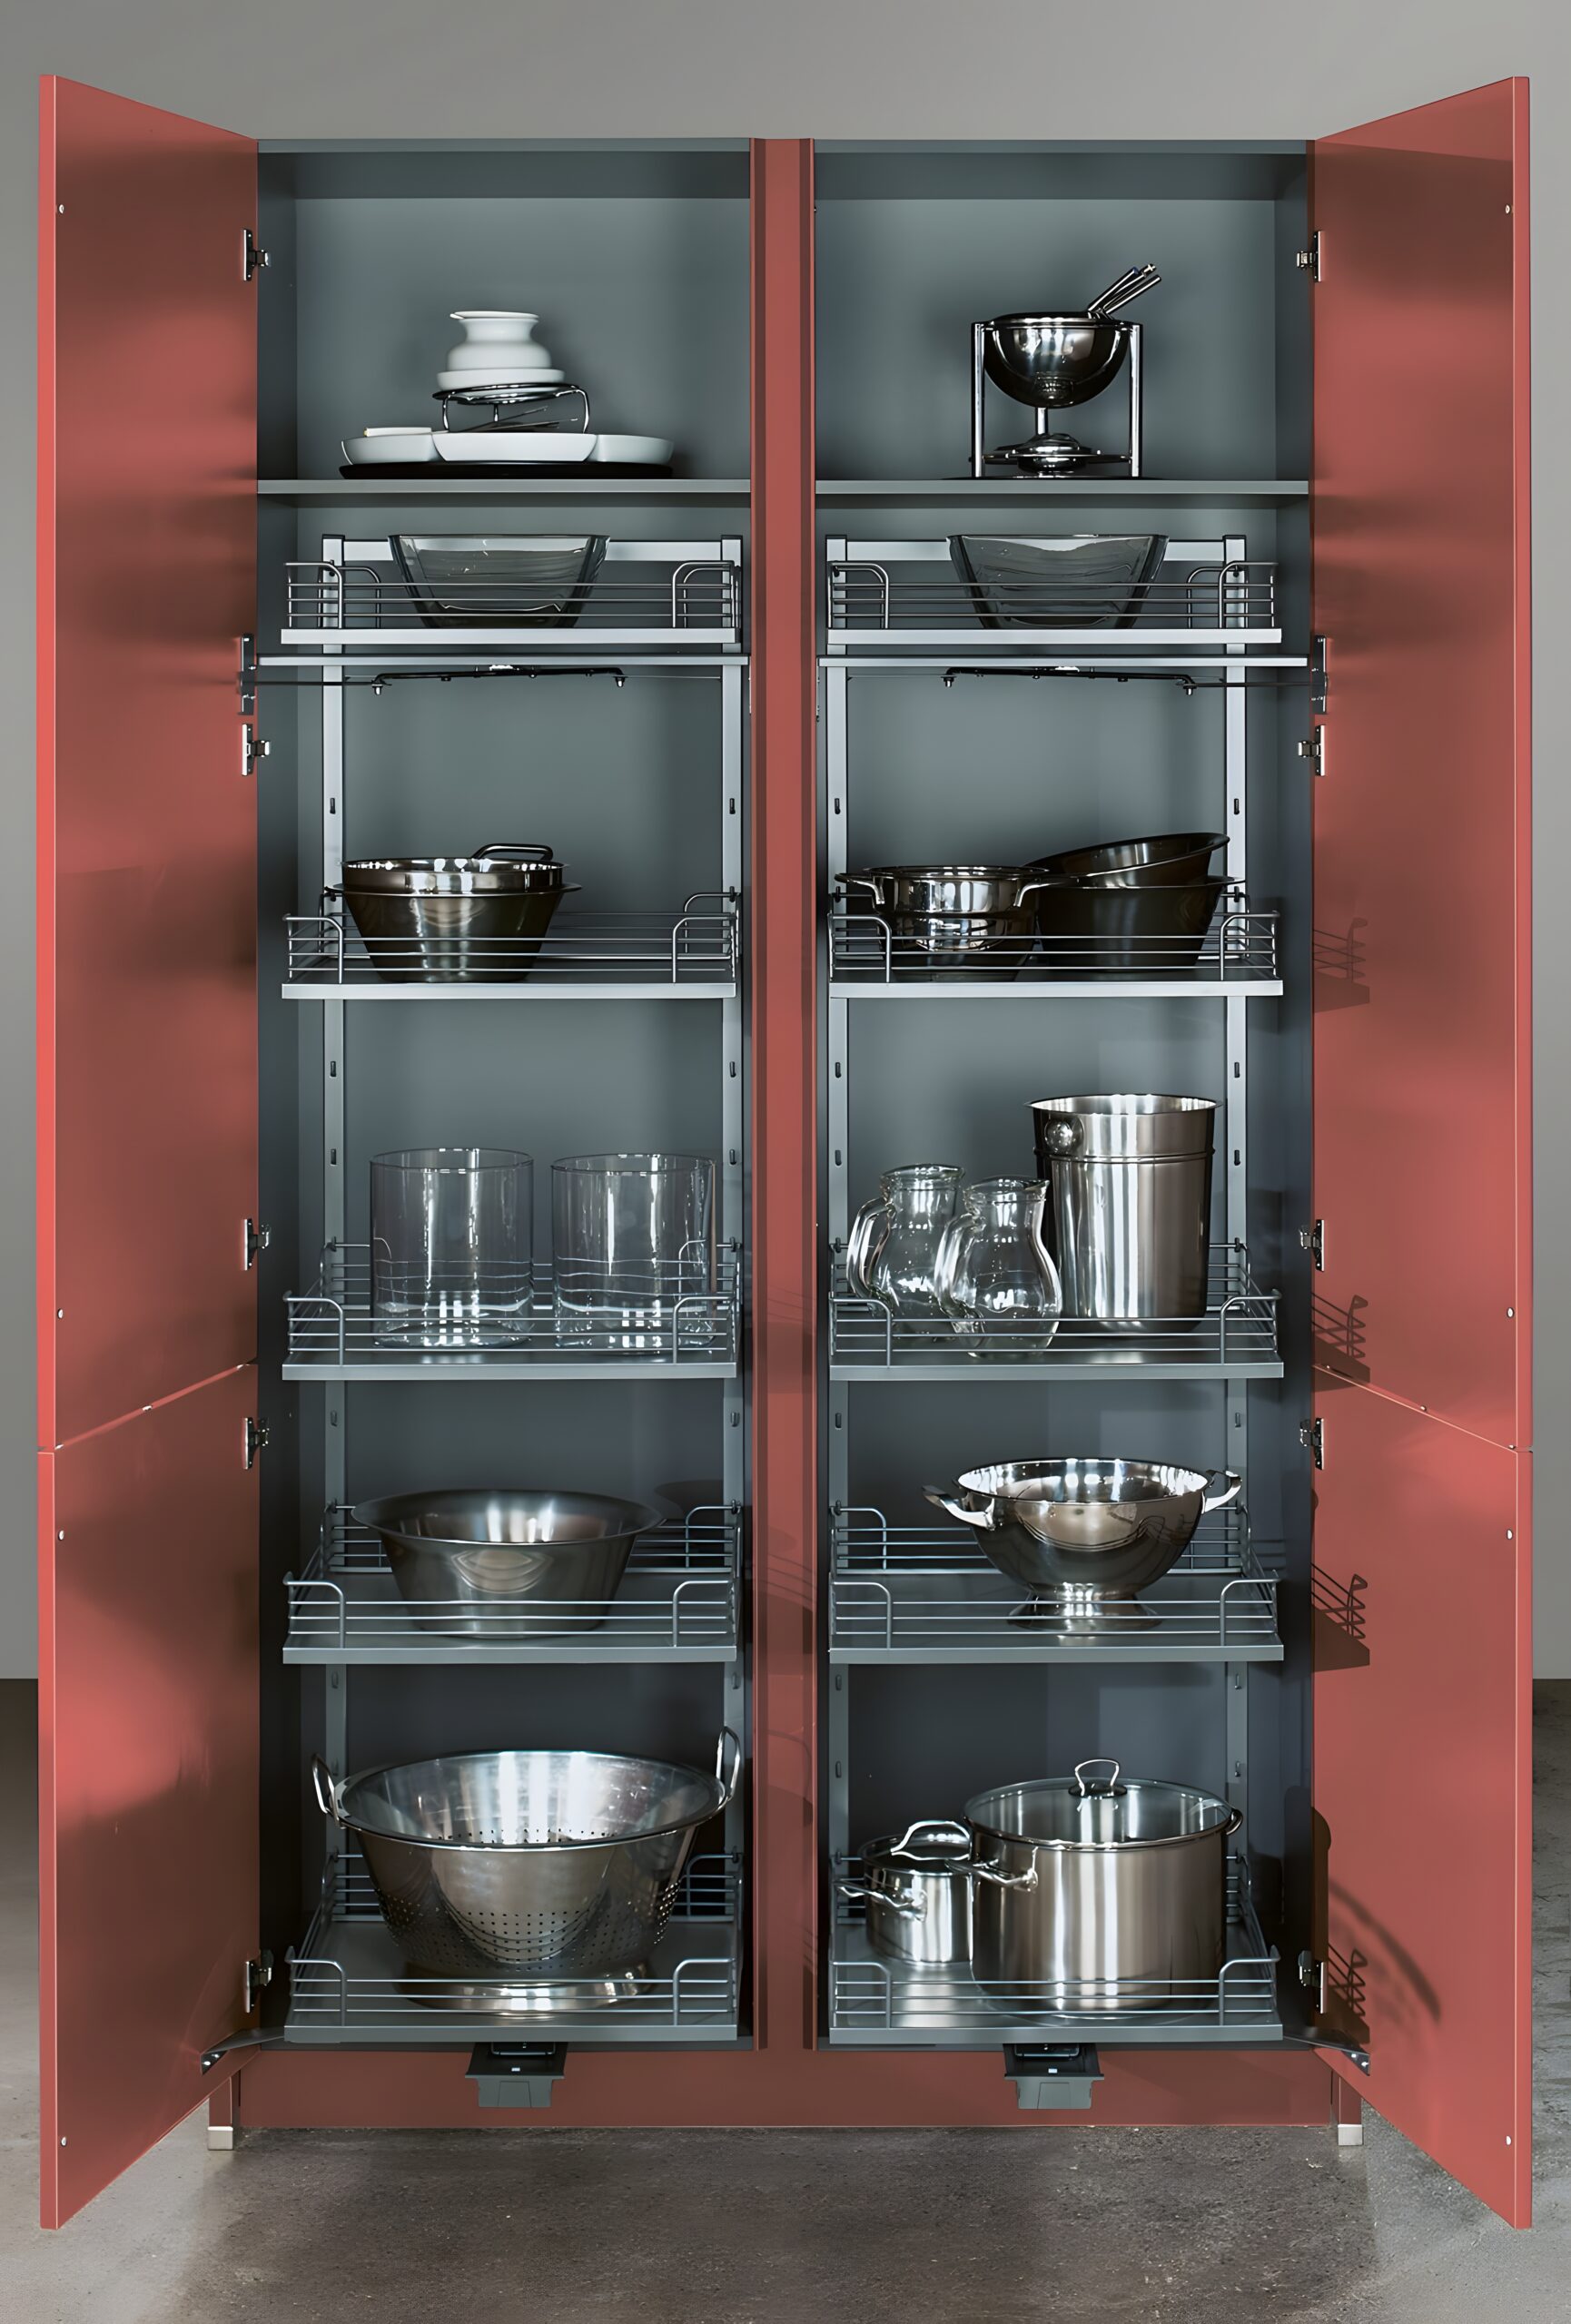 A neatly organized kitchen cabinet with open doors displaying a collection of pots, pans, and glassware on shelves, showcasing creative use of space for small pantries.